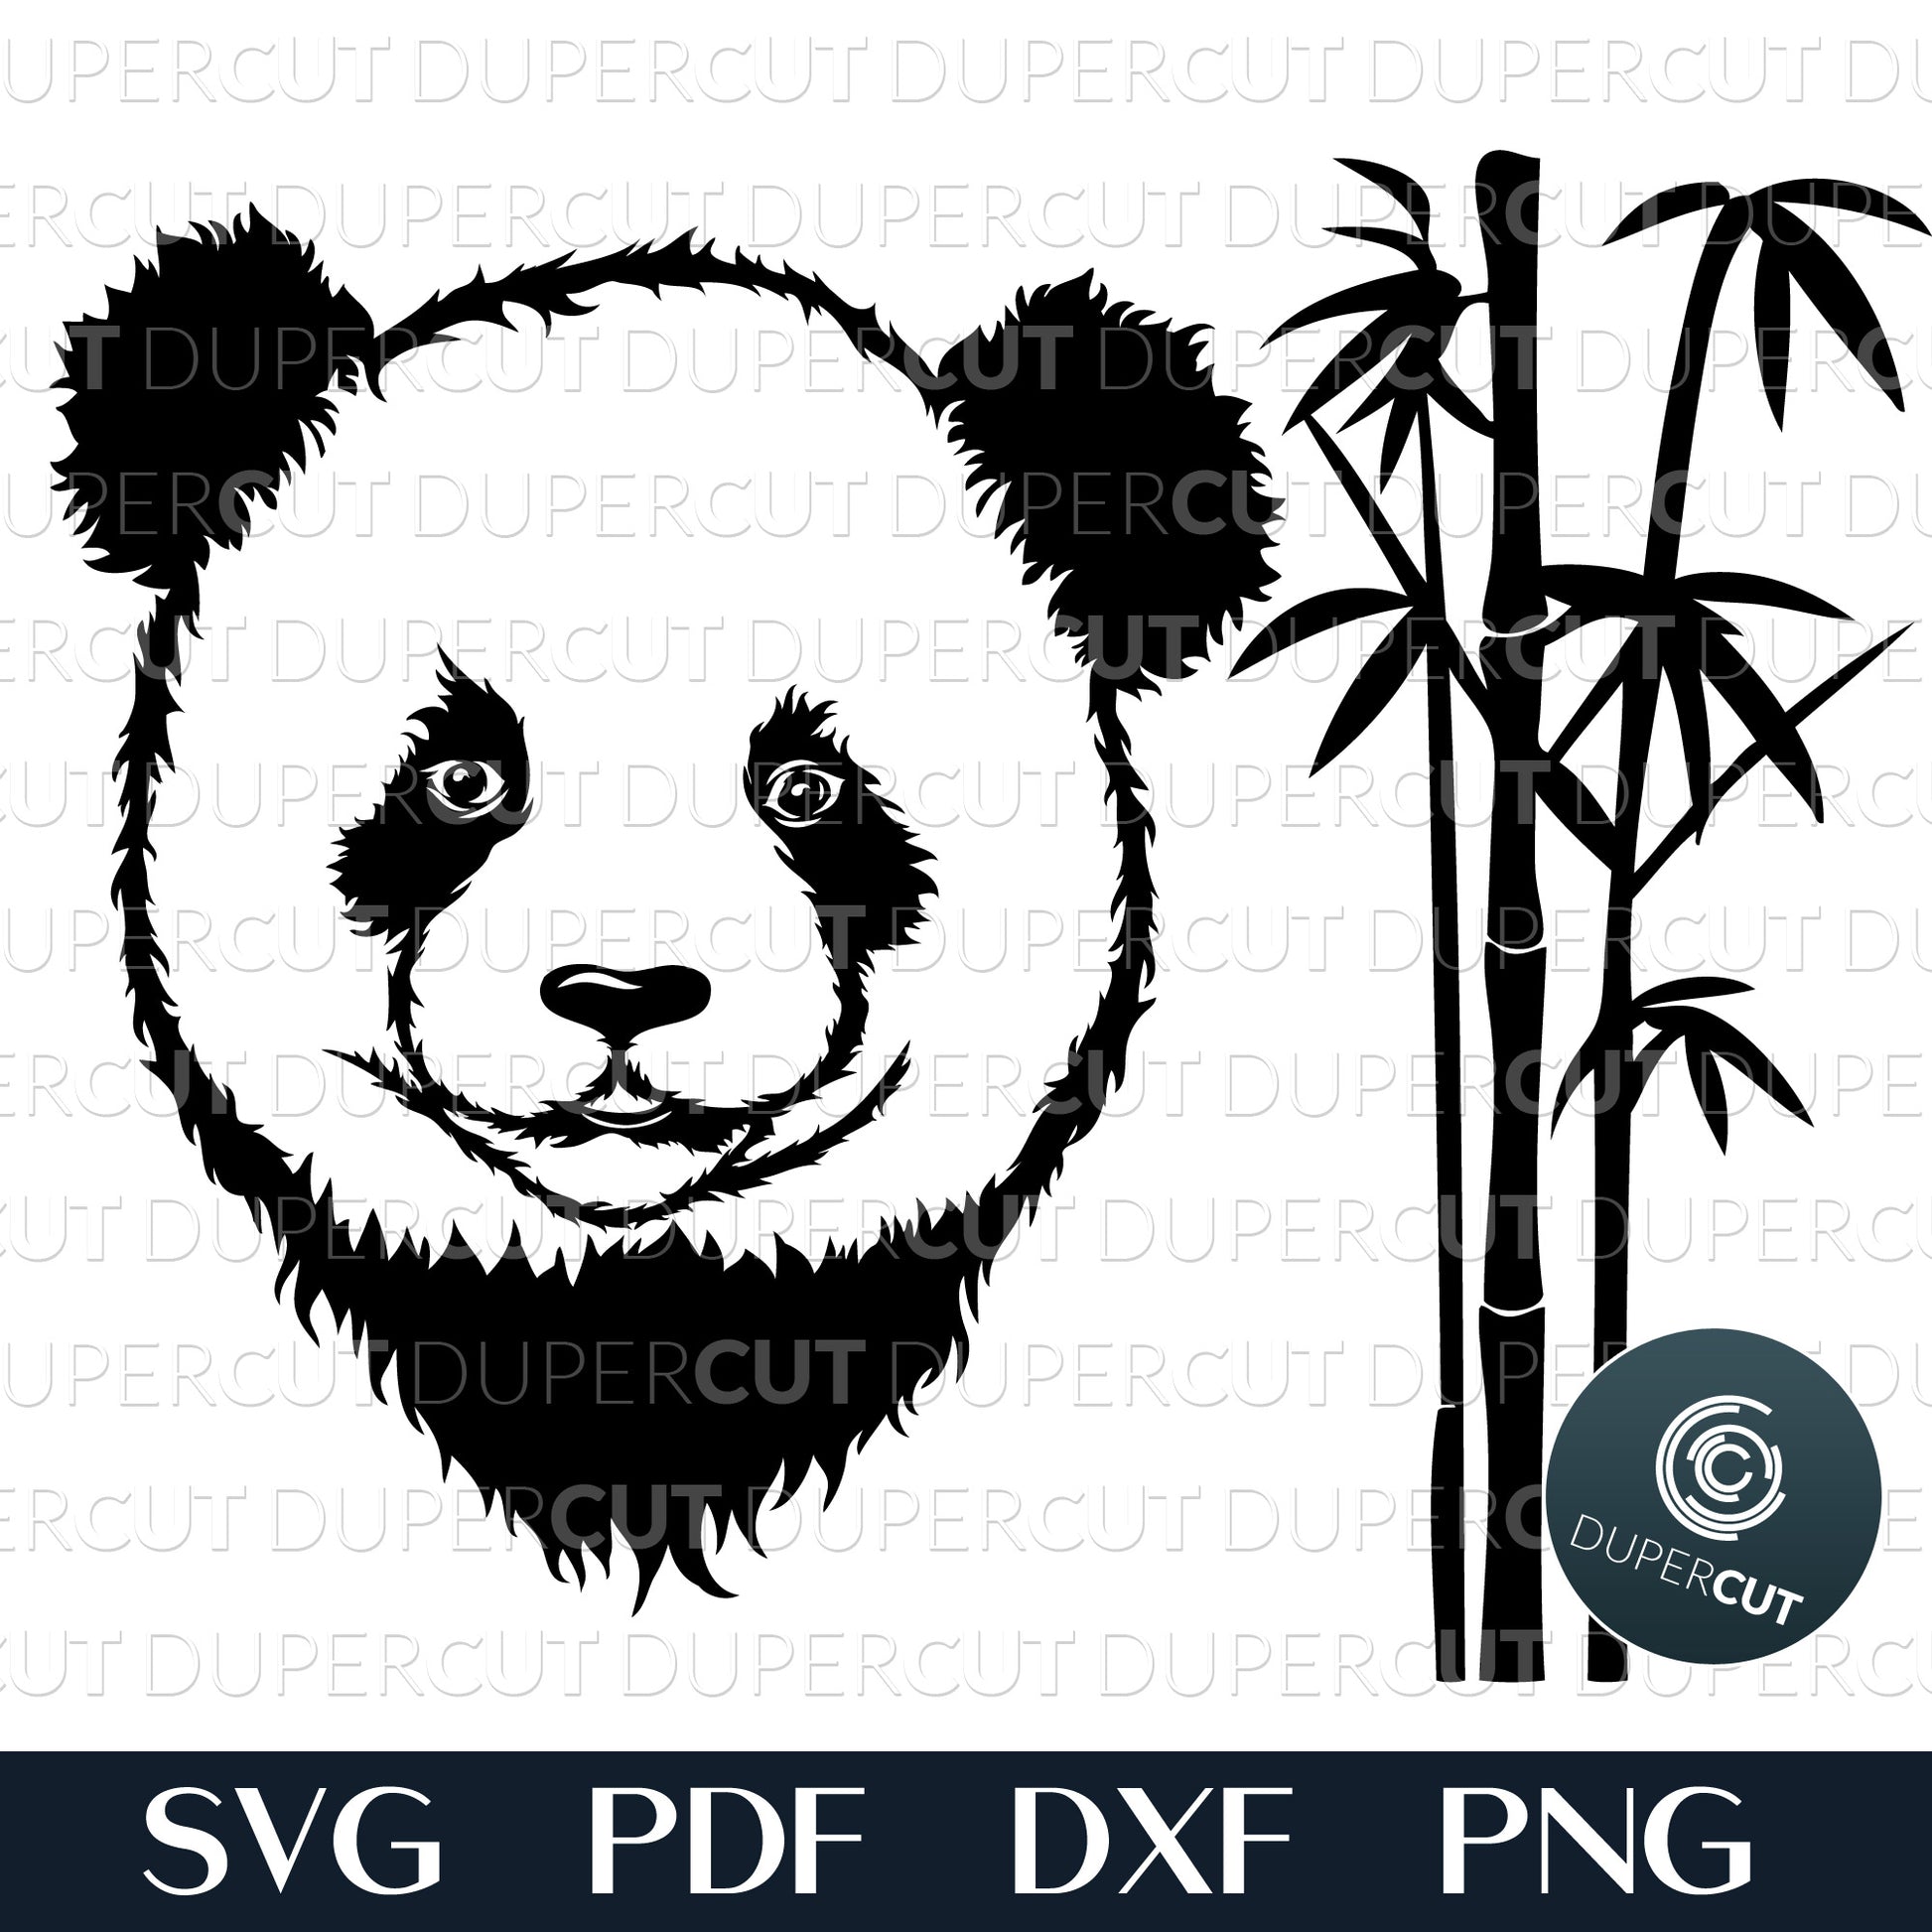 Panda bear with bamboo  - SVG DXF PNG files for CNC machines, laser cutting, Cricut, Silhouette Cameo, Glowforge engraving